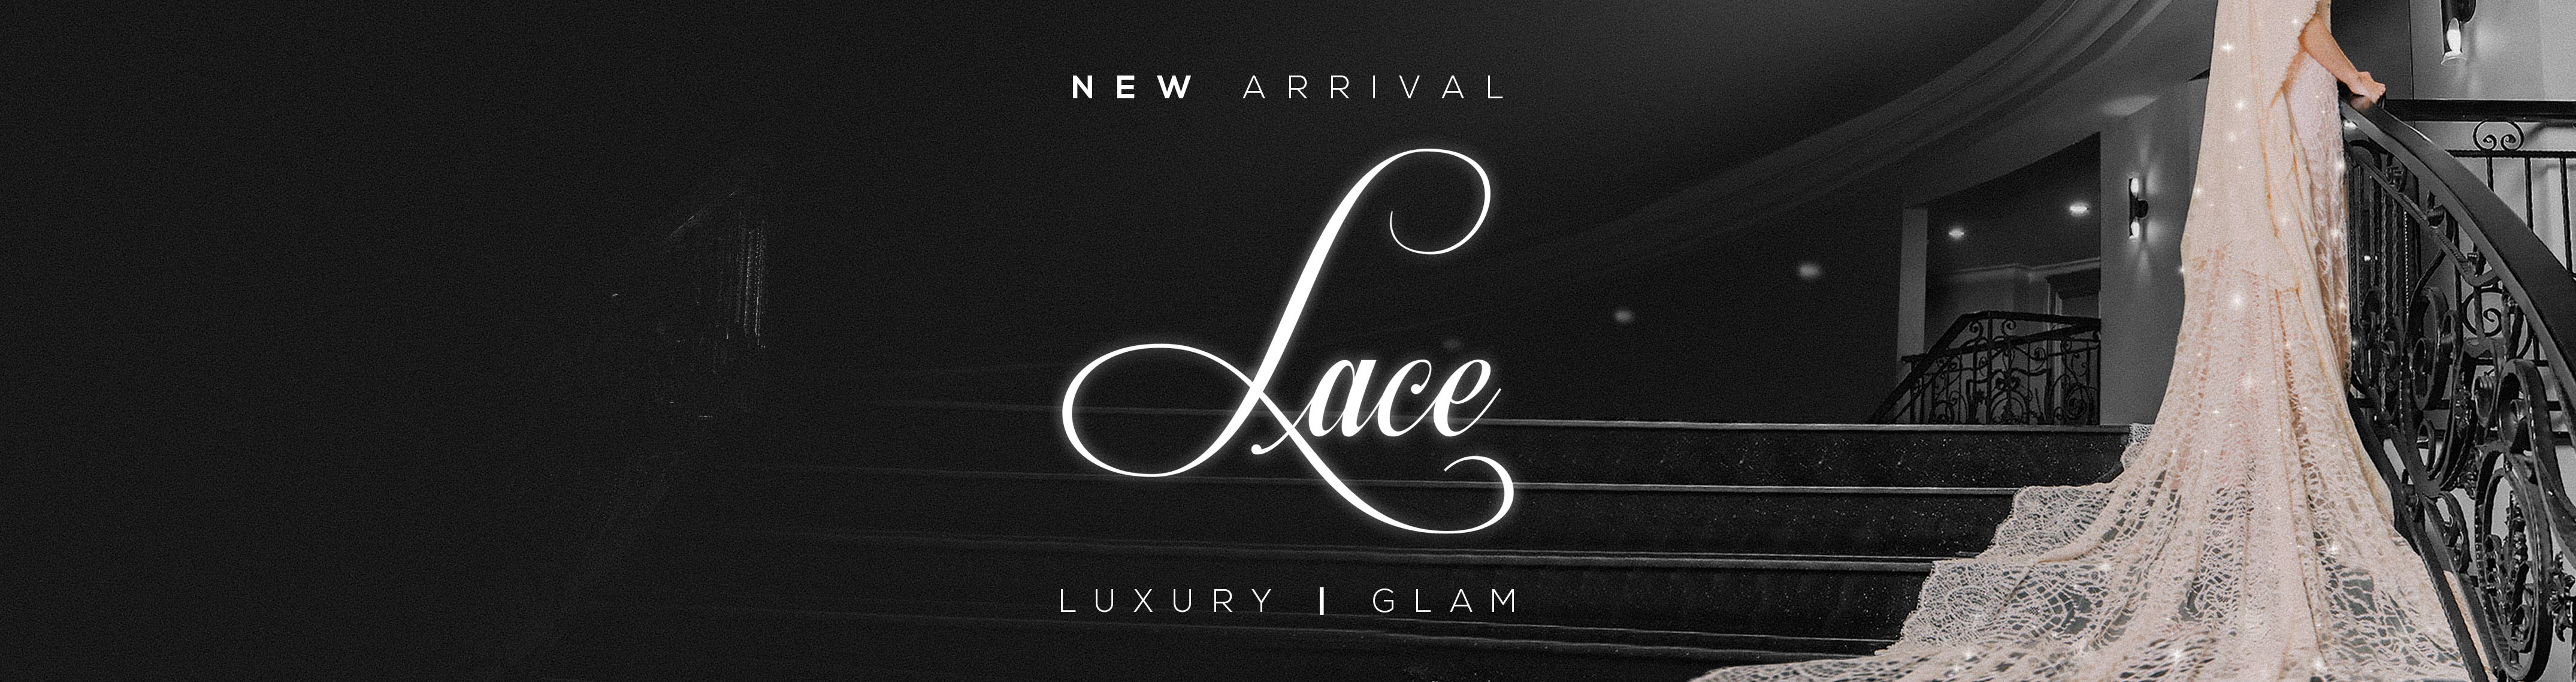 LACE EXCLUSIVE